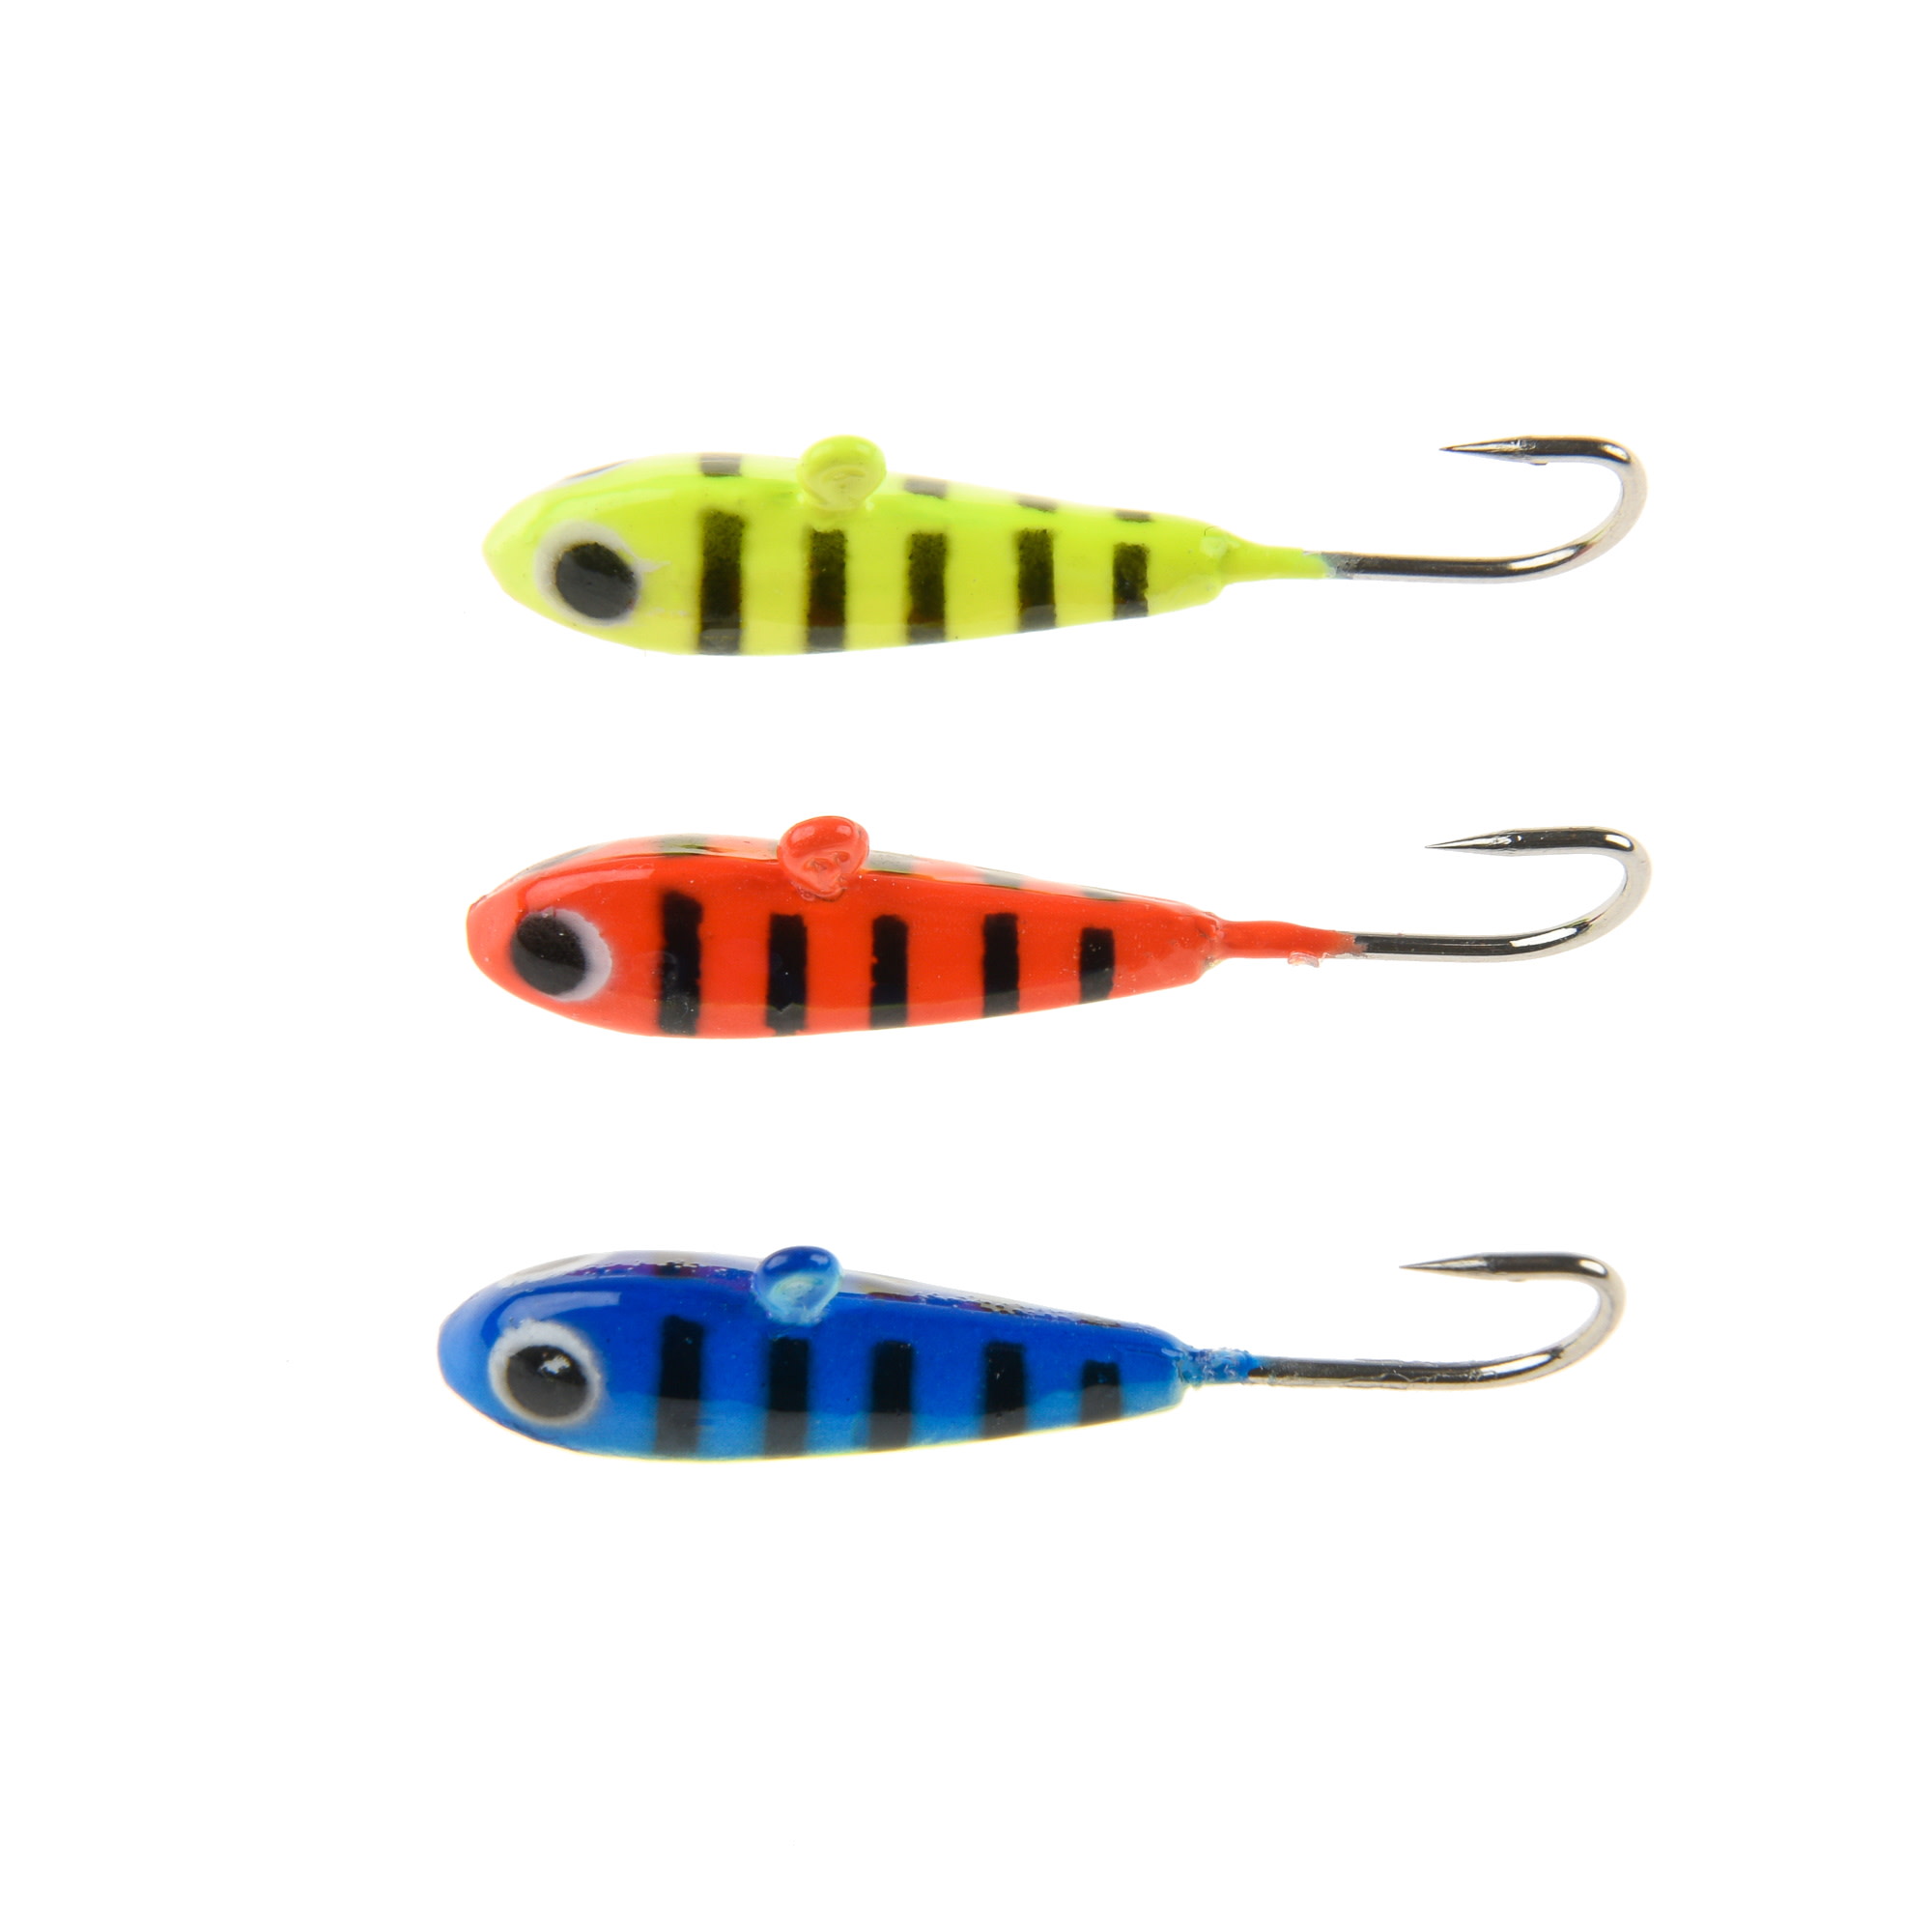 iFish Ronja 37mm 3-pack Nocolour